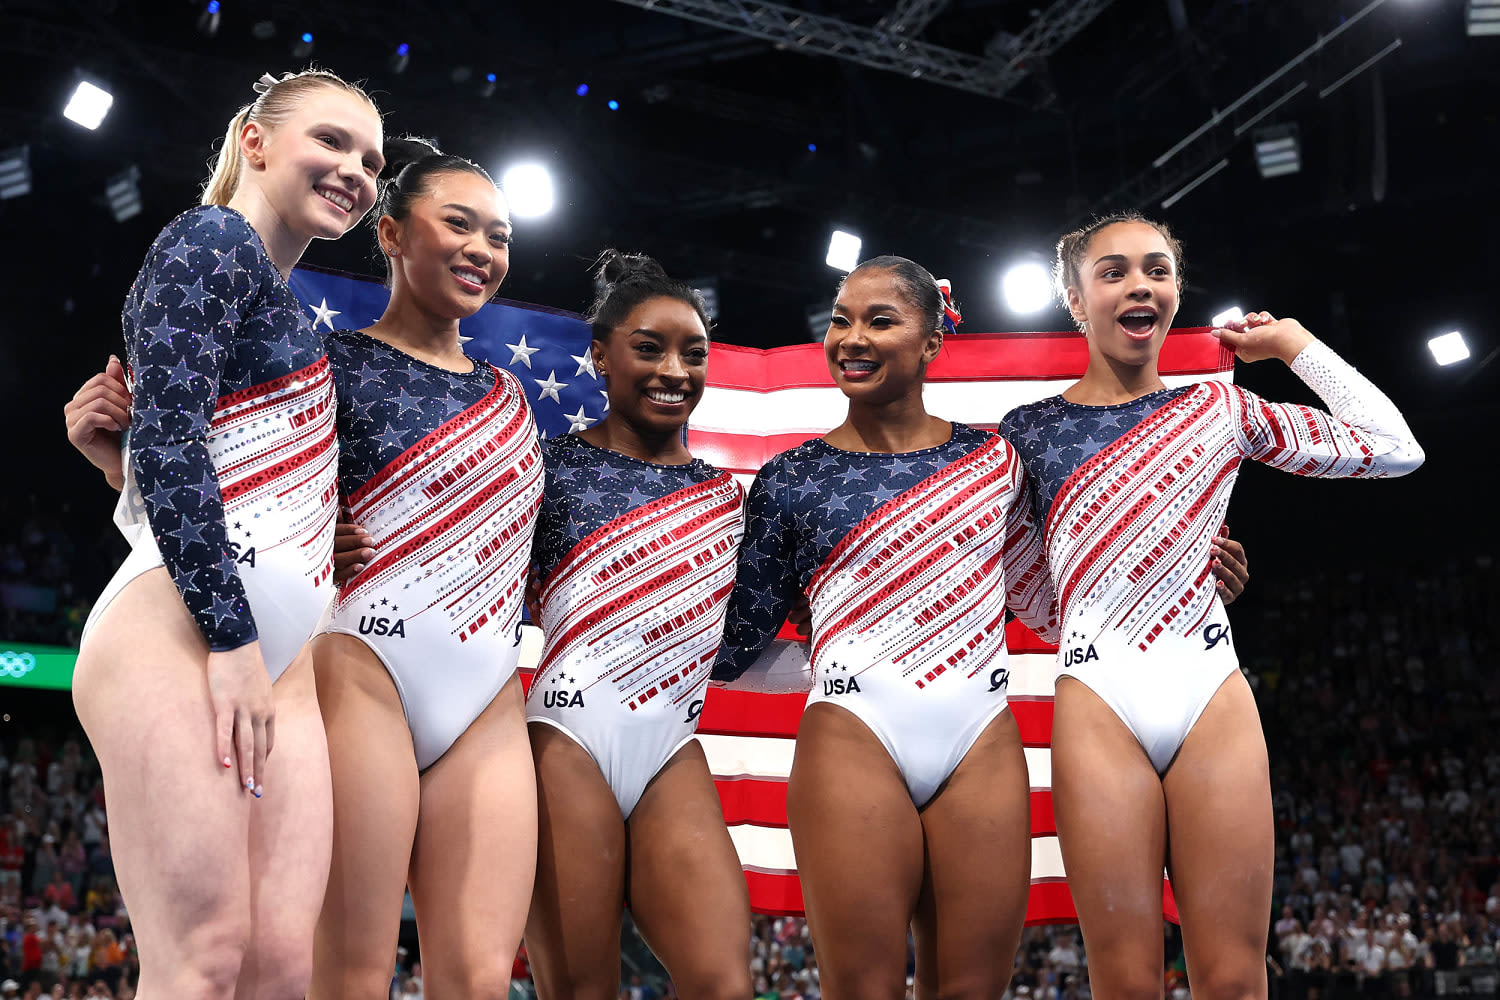 Olympics events to watch today, including the women's gymnastics all-around final